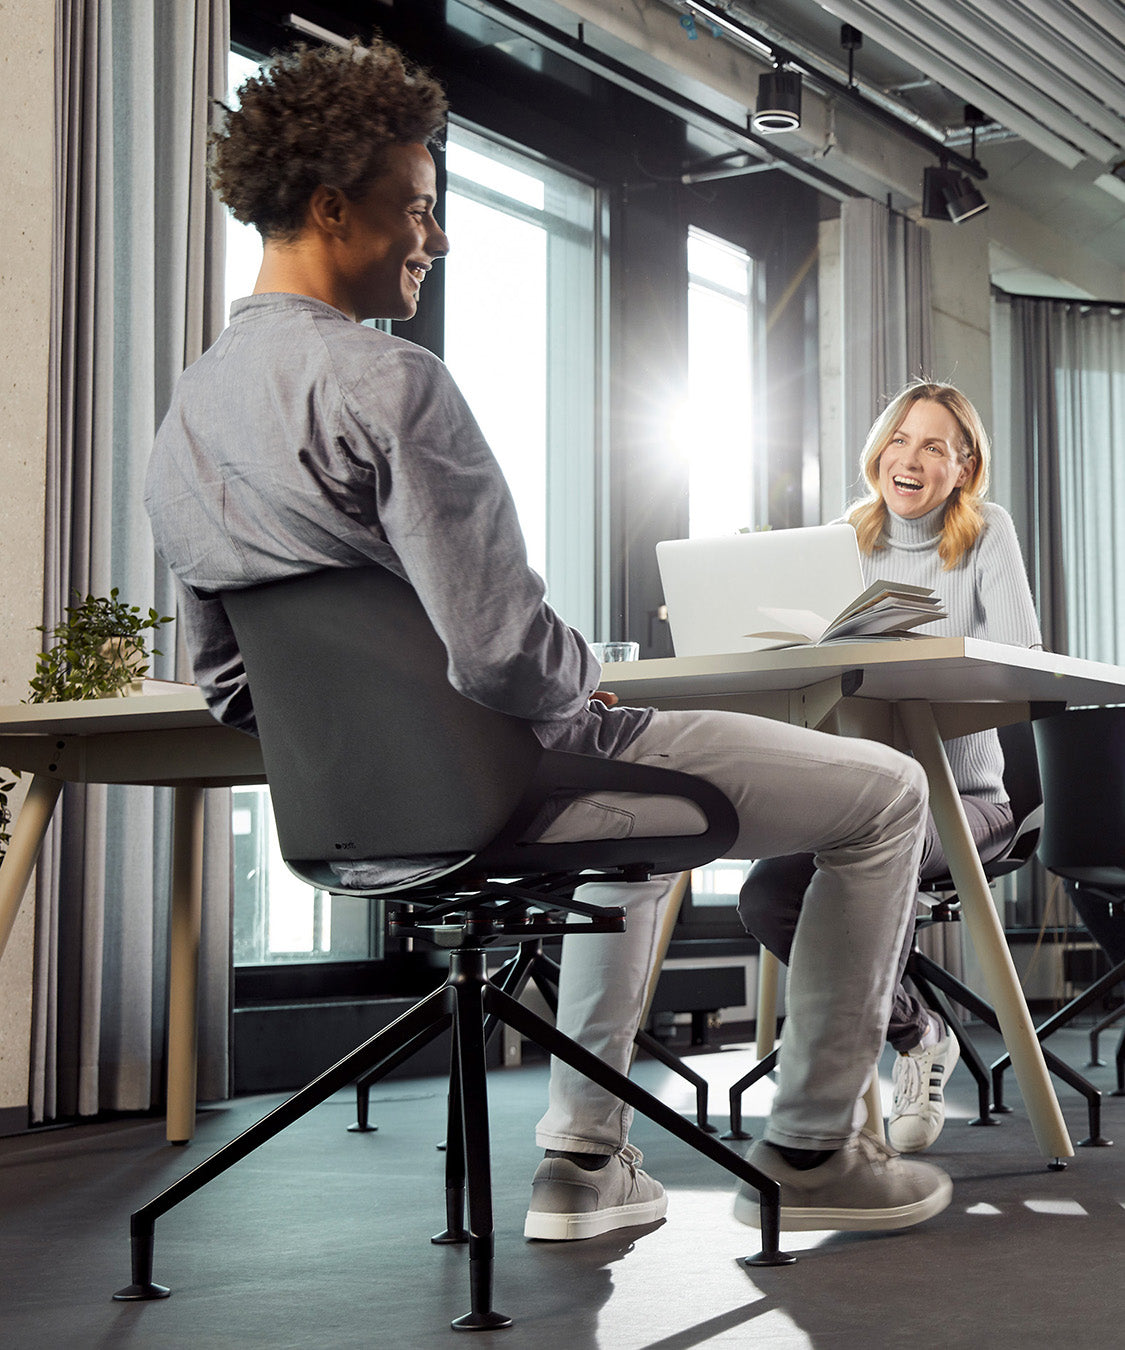 The Aeris Numo is the perfect meeting chair.